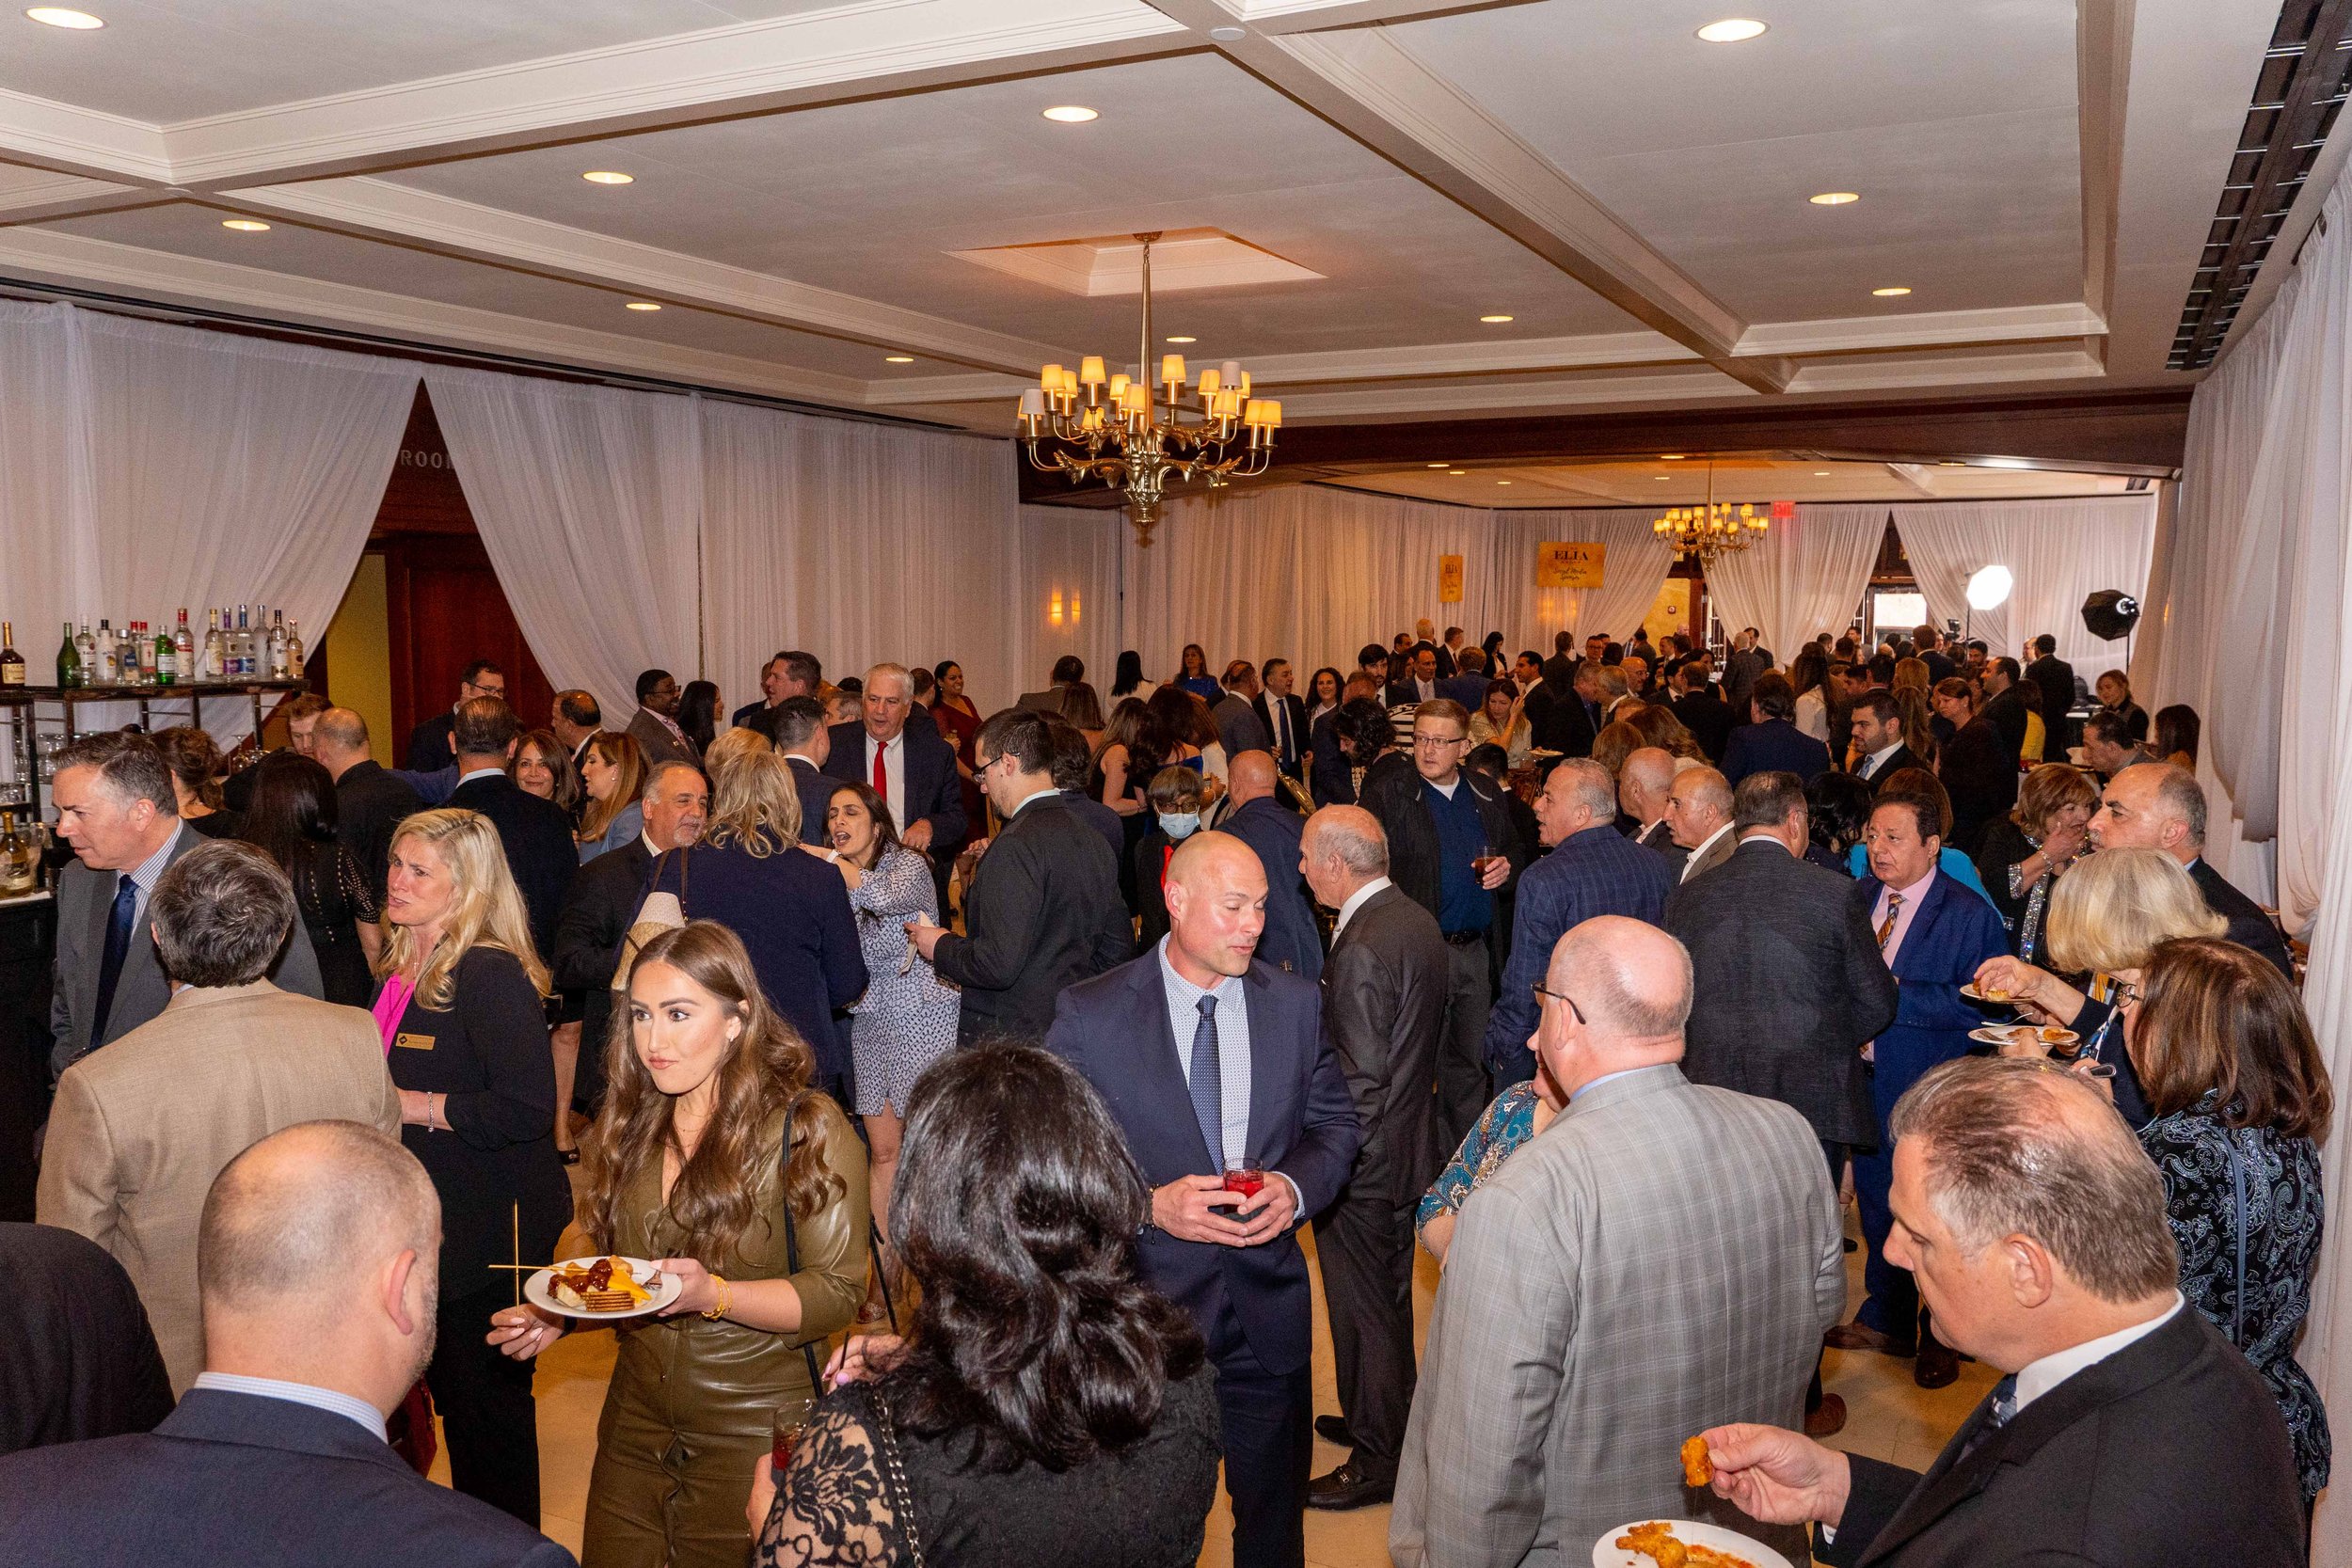  Over 800 people attended the much-anticipated annual event. 